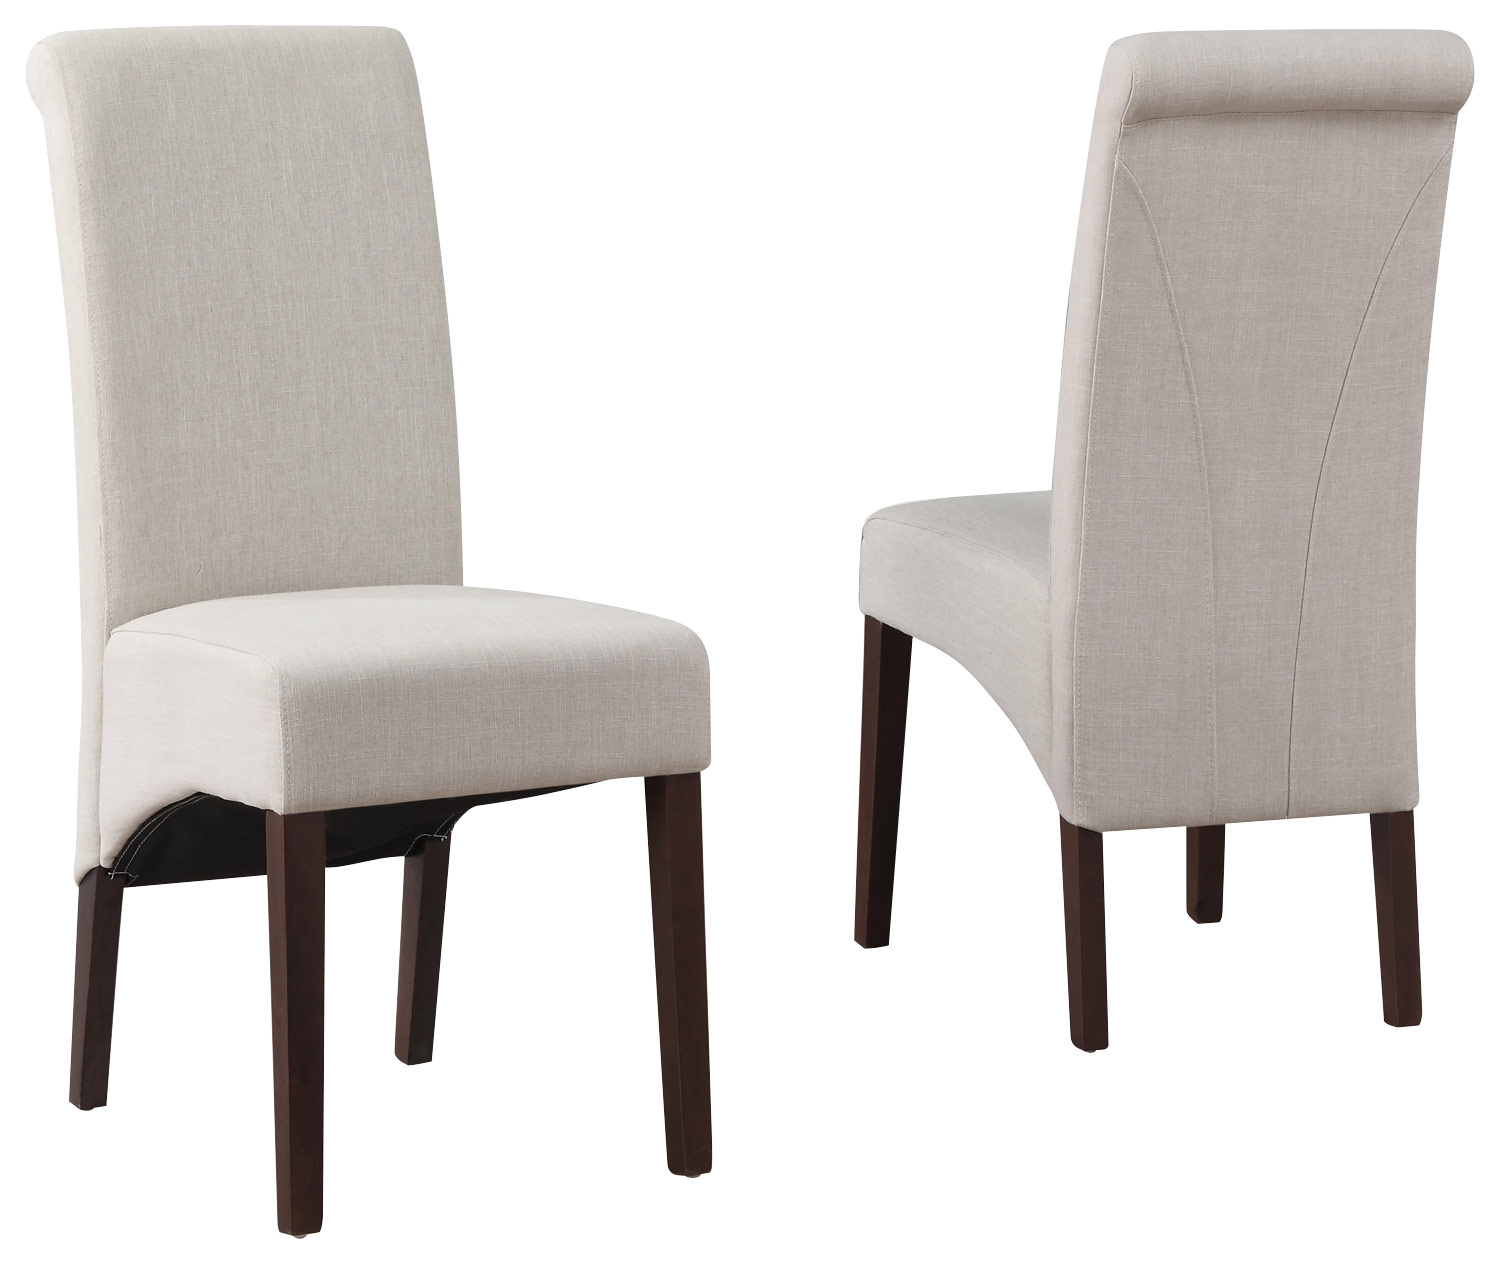 Simpli Home - Avalon Deluxe Parson Chairs (Set of 2) - Natural was $268.99 now $199.99 (26.0% off)